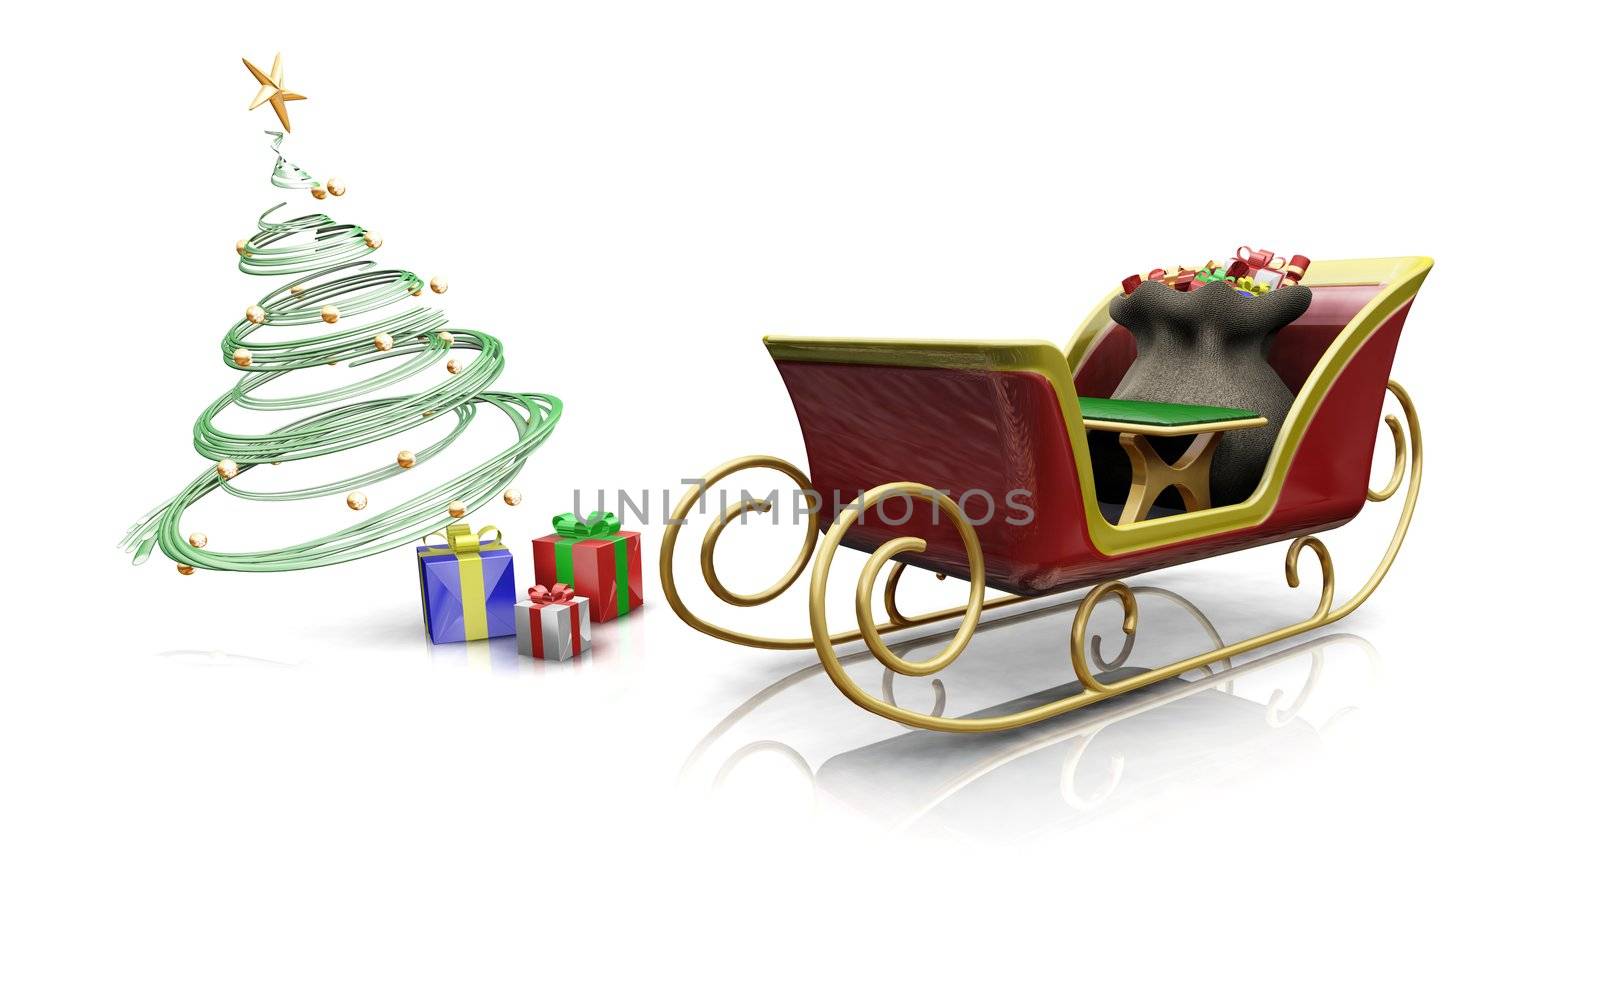 3D render of santas sleigh with presents and a Christmas tree